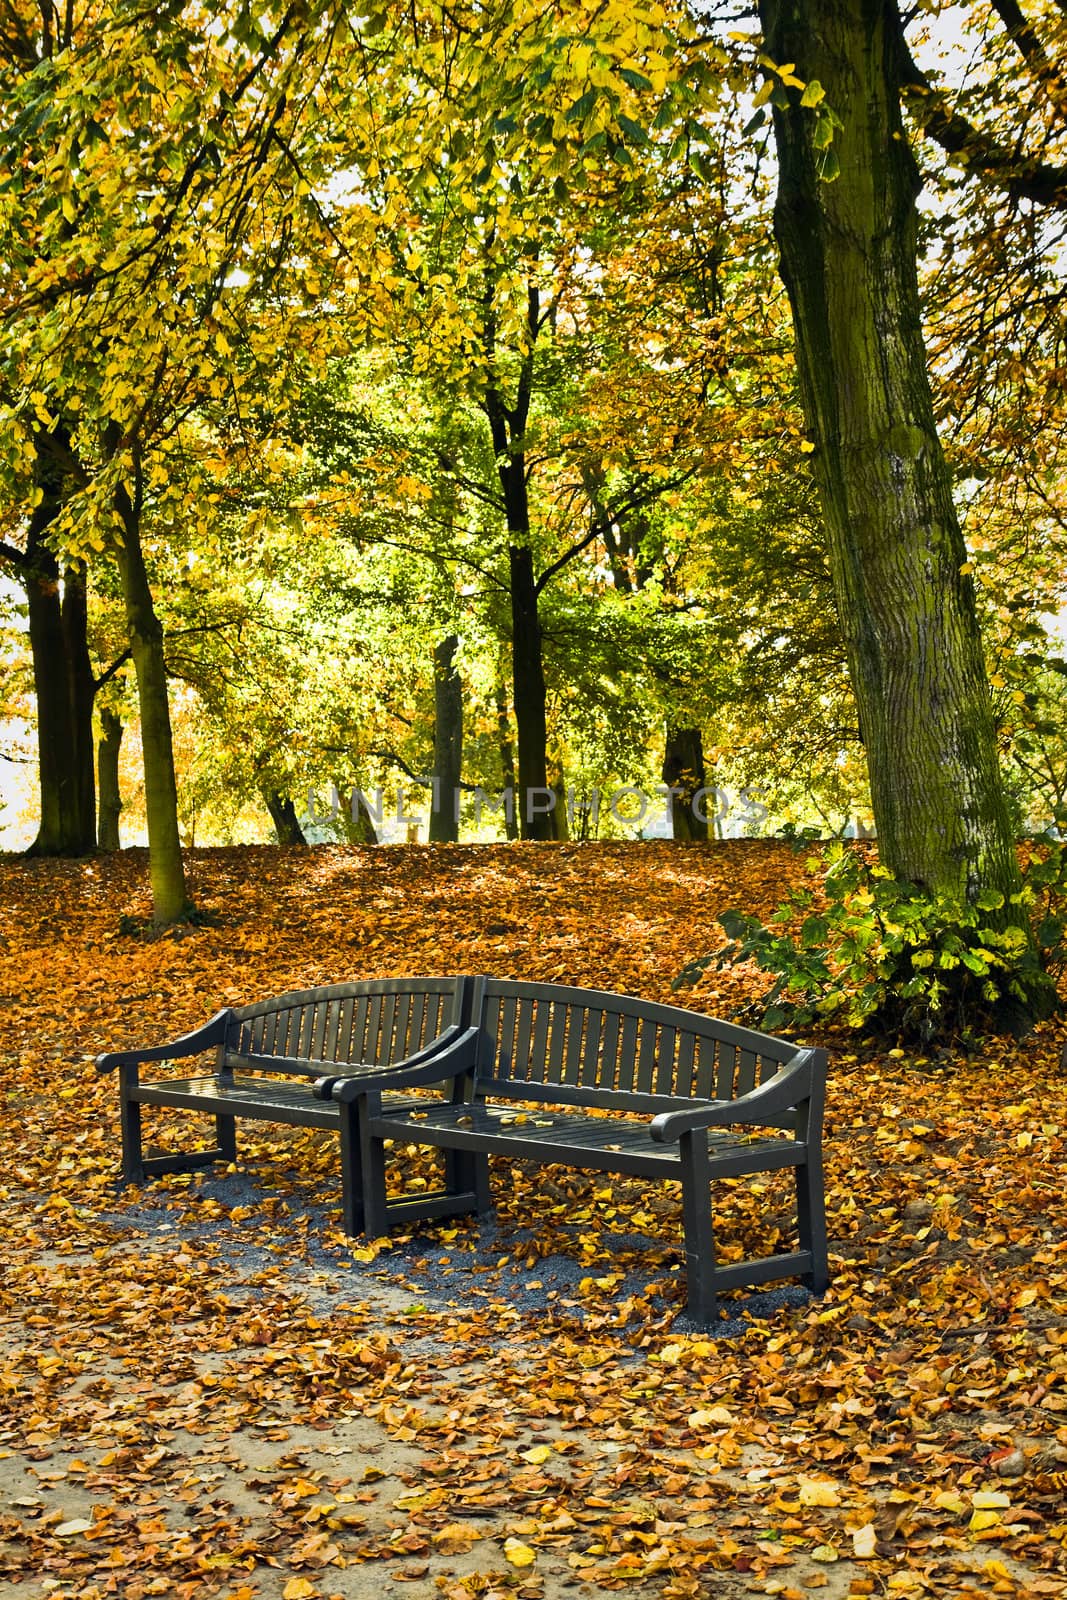 Park in autumn with benches made of recycled plastics - veritcal